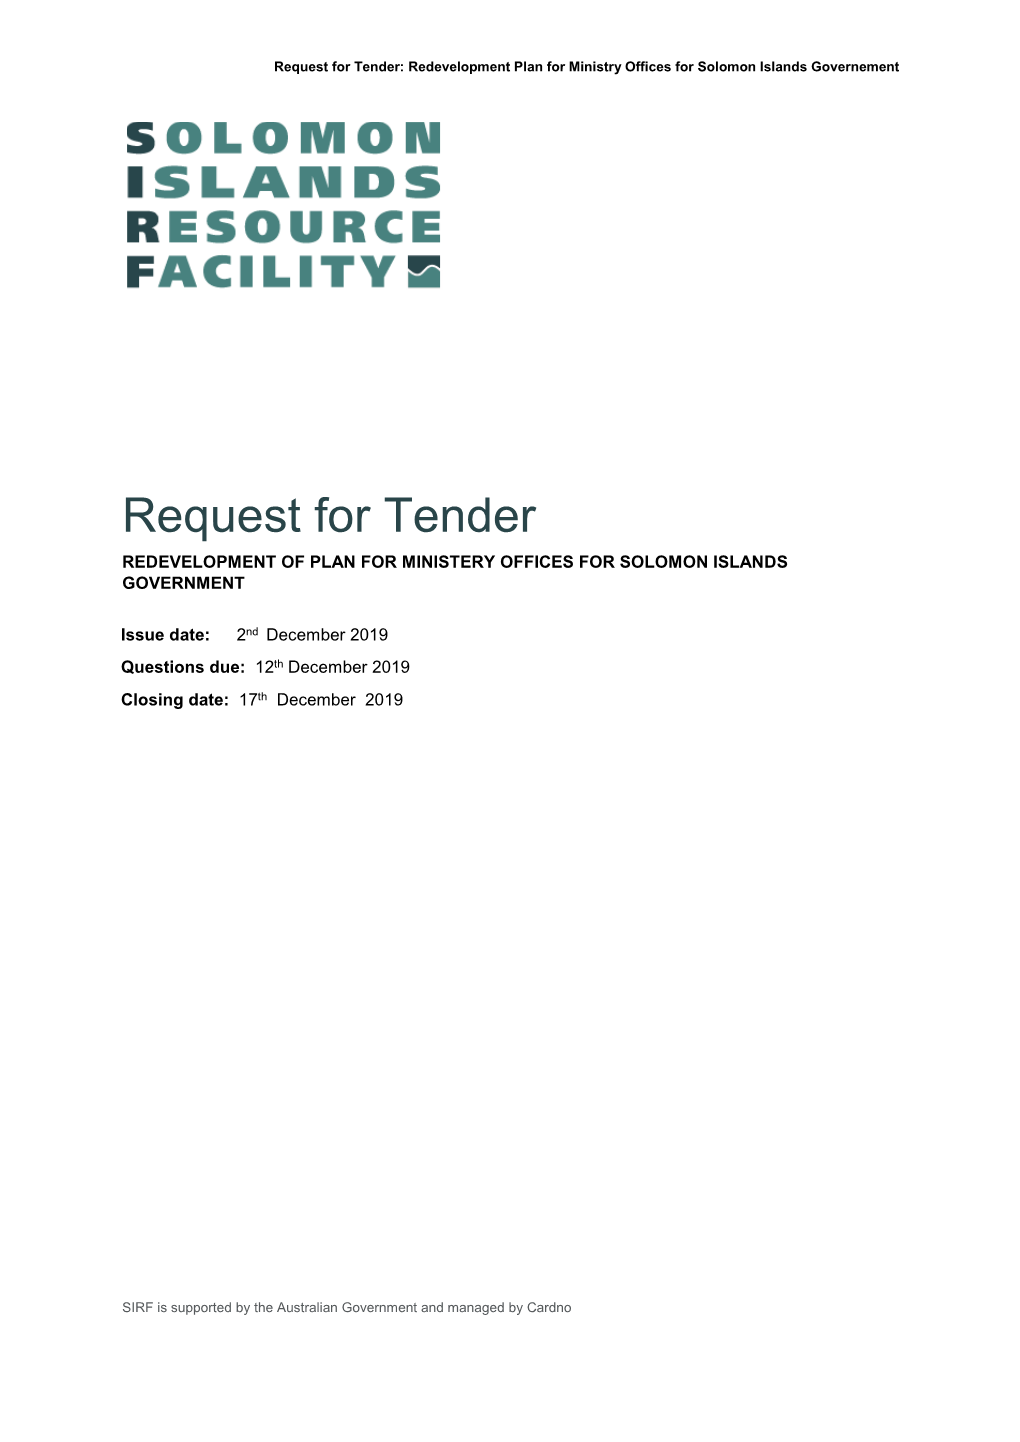 Request for Tender: Redevelopment Plan for Ministry Offices for Solomon Islands Governement